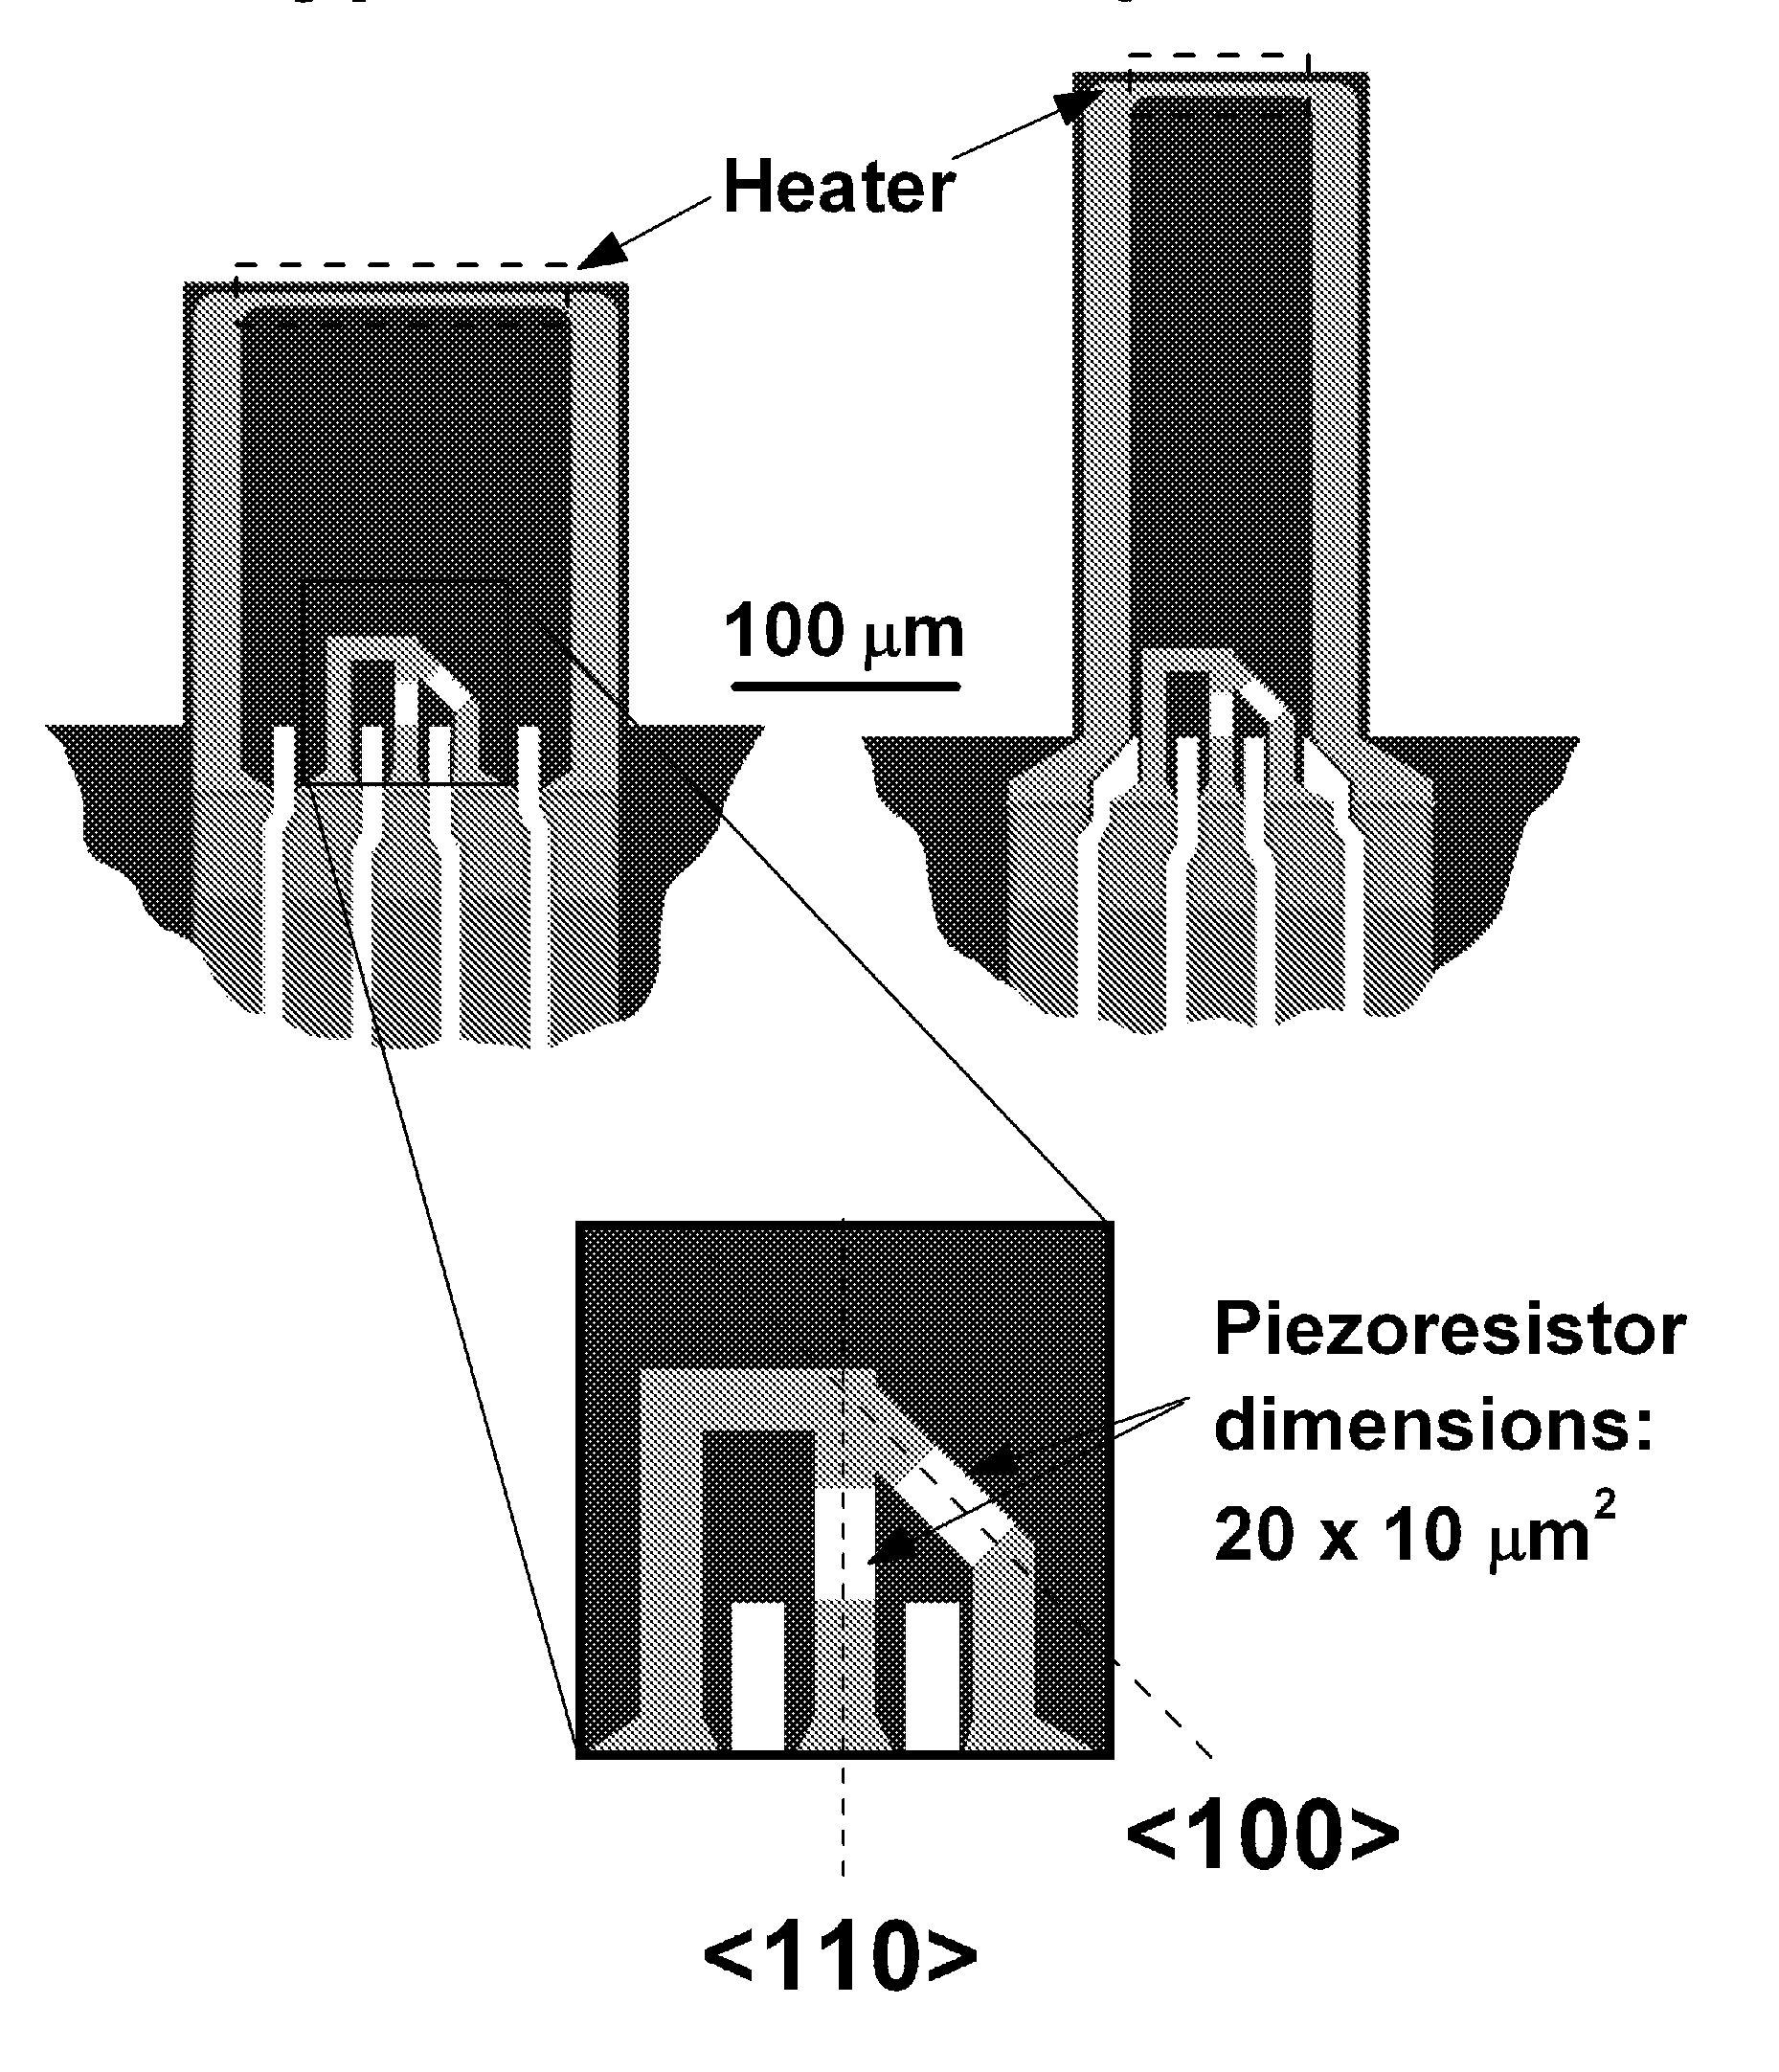 Microcantilever heater-thermometer with integrated temperature-compensated strain sensor